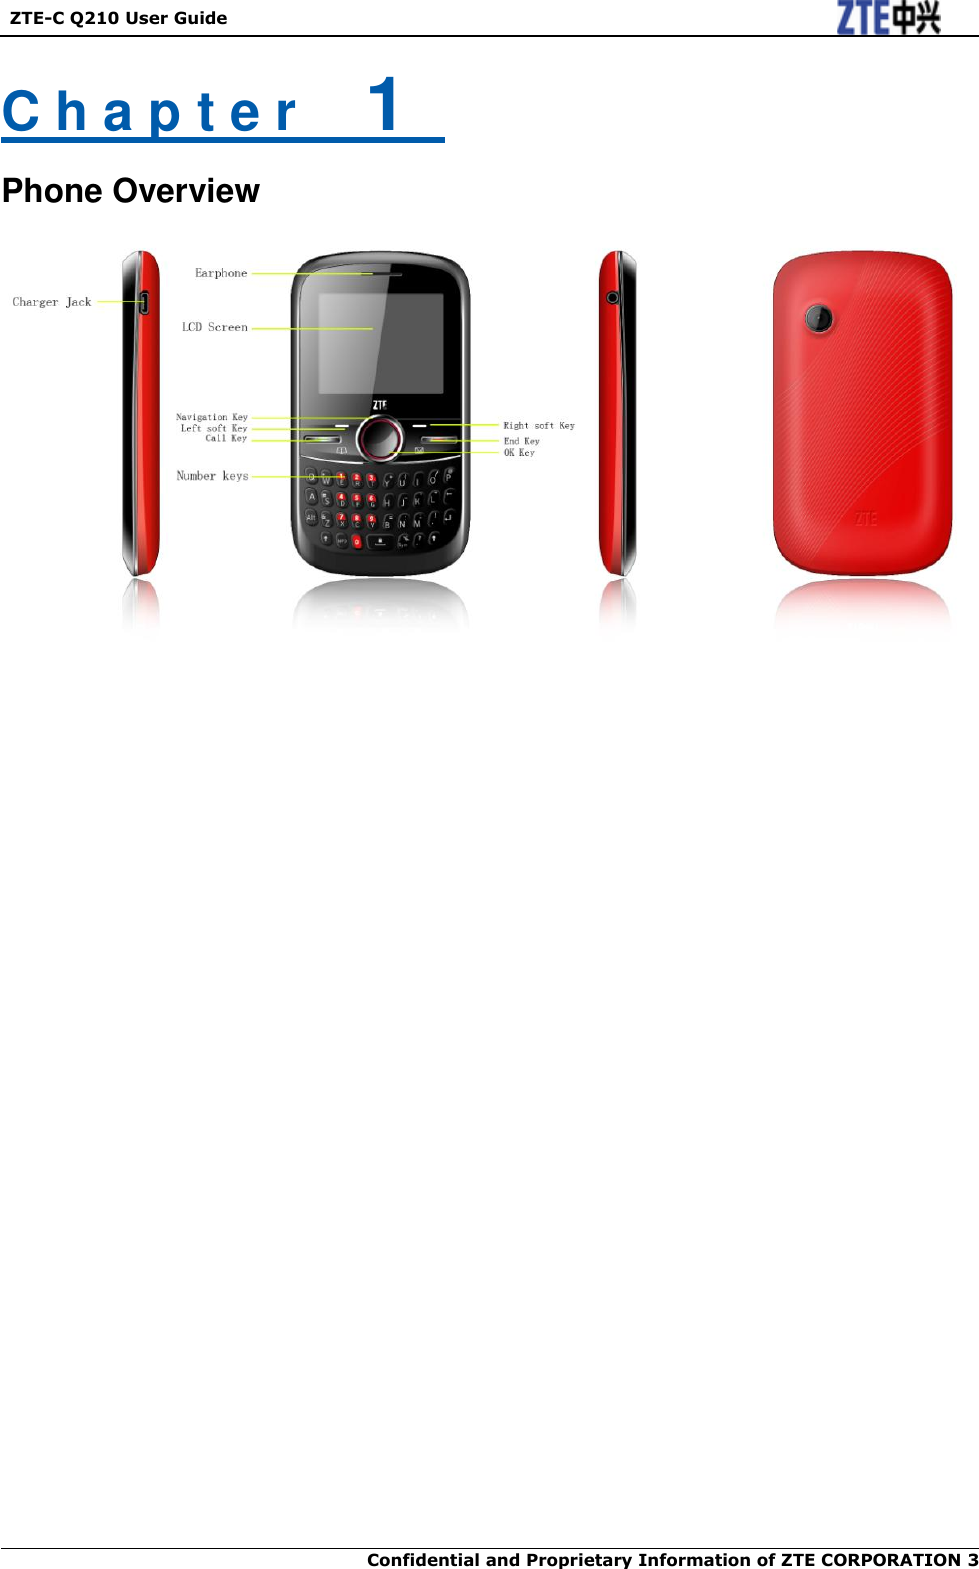   ZTE-C Q210 User Guide  Confidential and Proprietary Information of ZTE CORPORATION 3    C h a p t e r    1   Phone Overview 